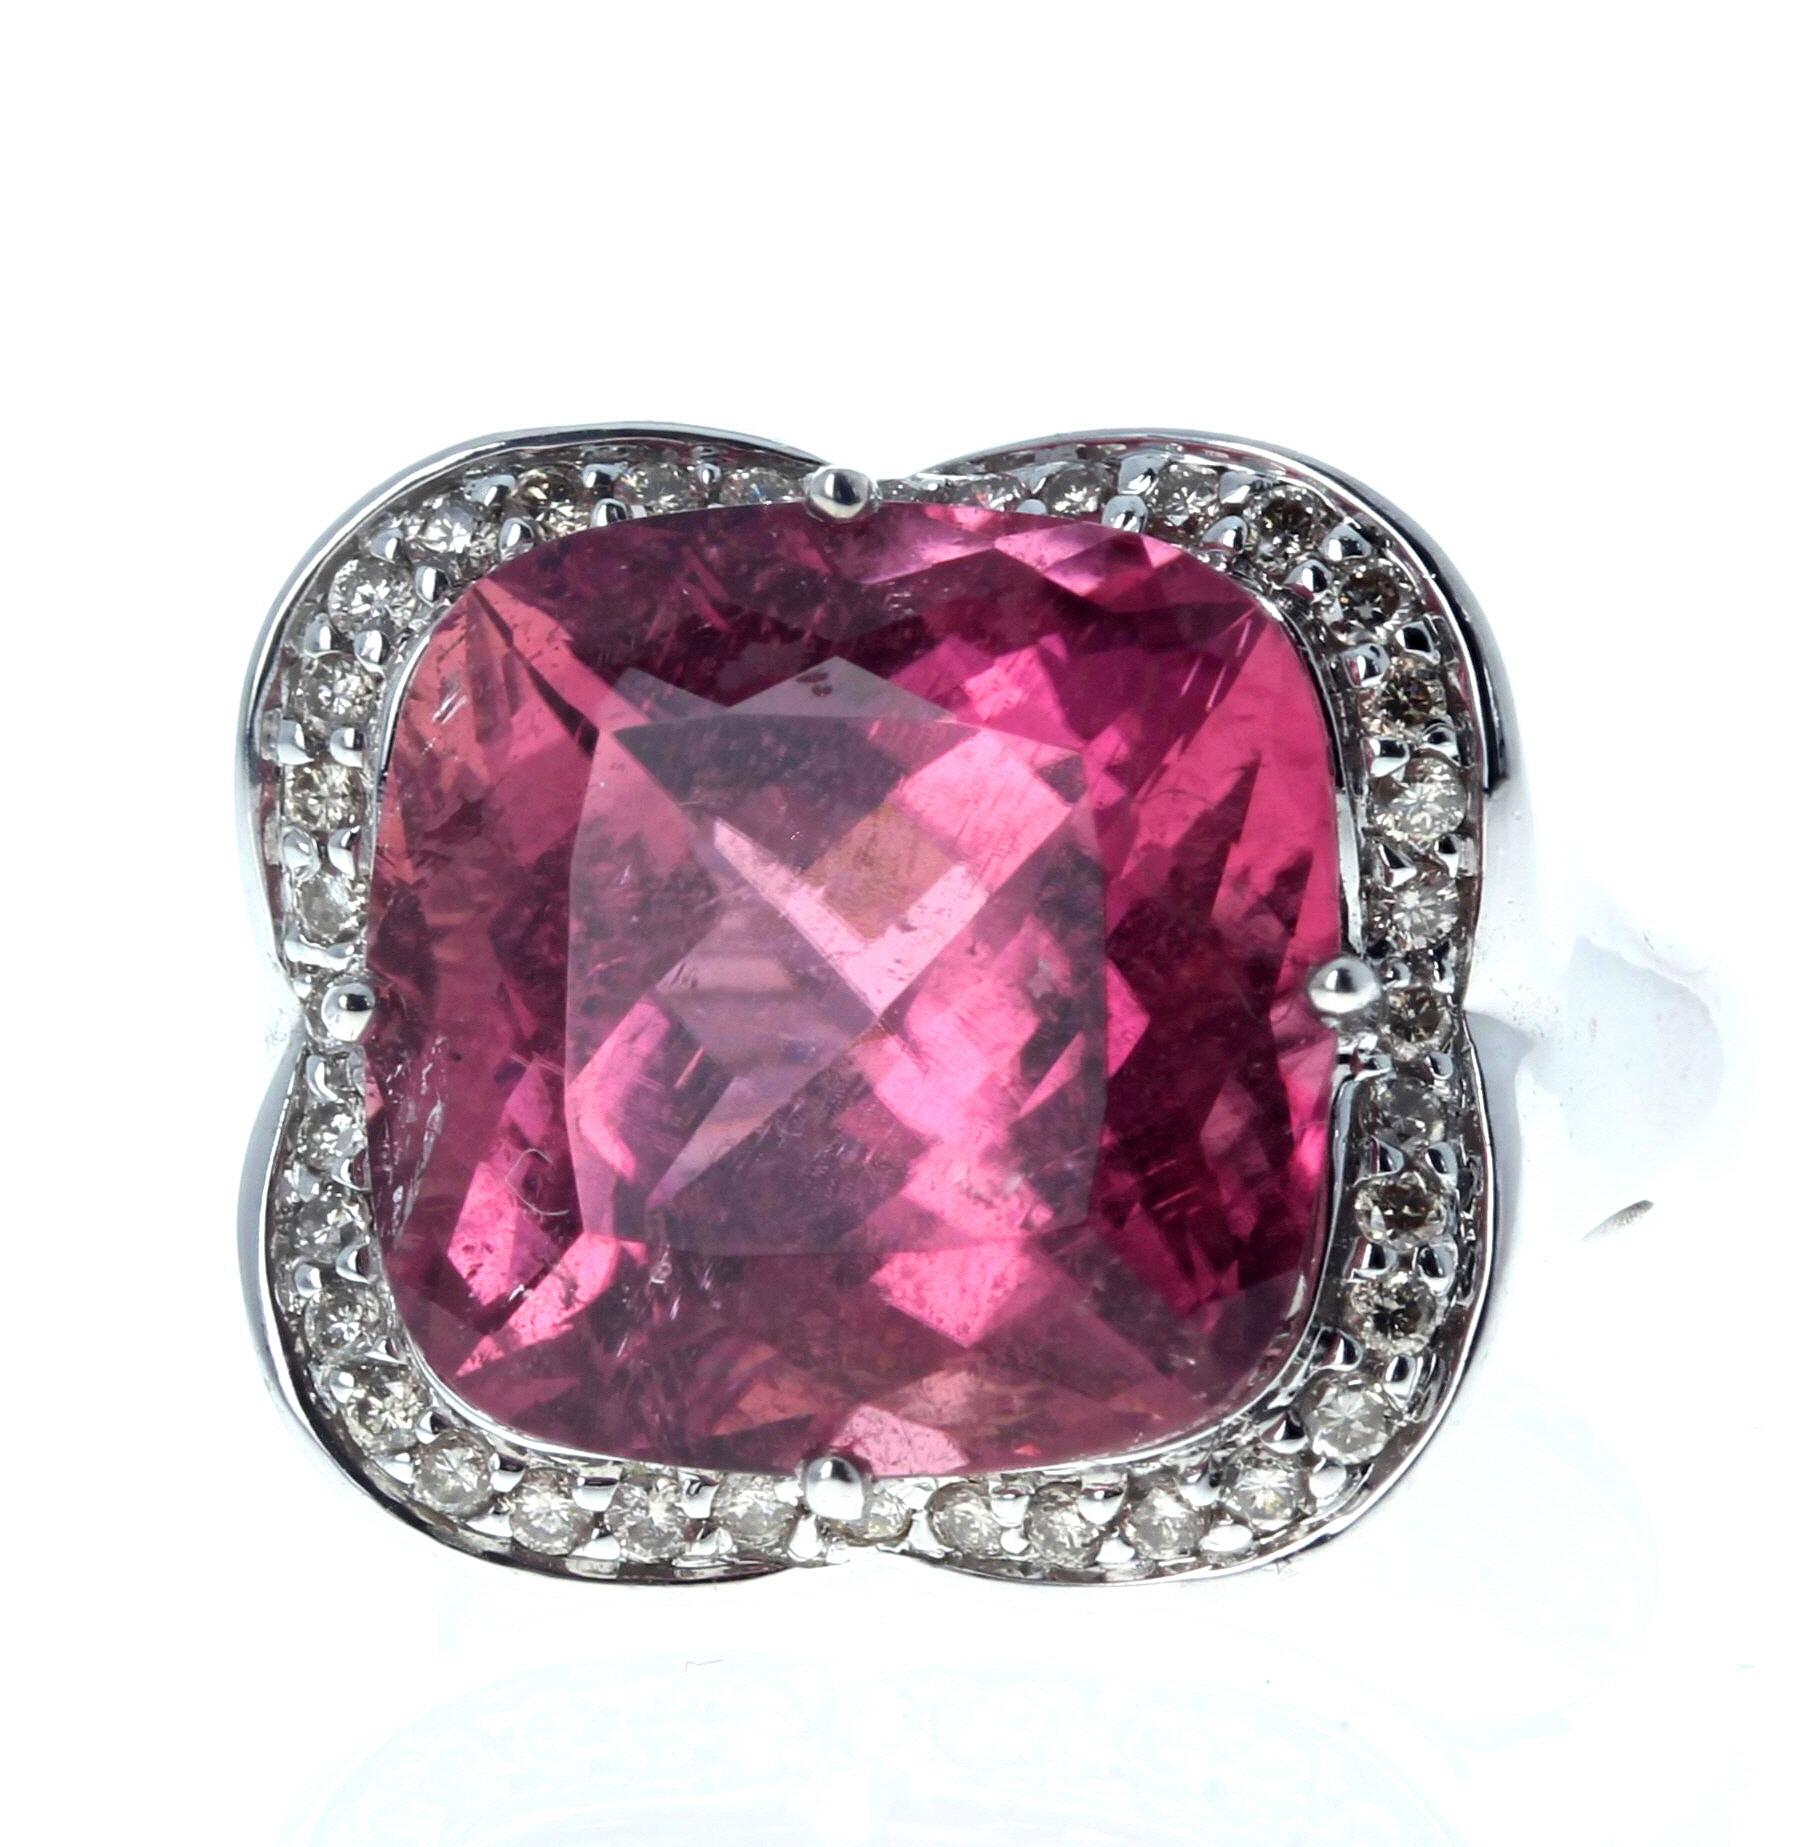 Mixed Cut AJD Brilliant Clear Intense Pinkyred Natural 11.46 Ct Tourmaline & Diamonds Ring For Sale